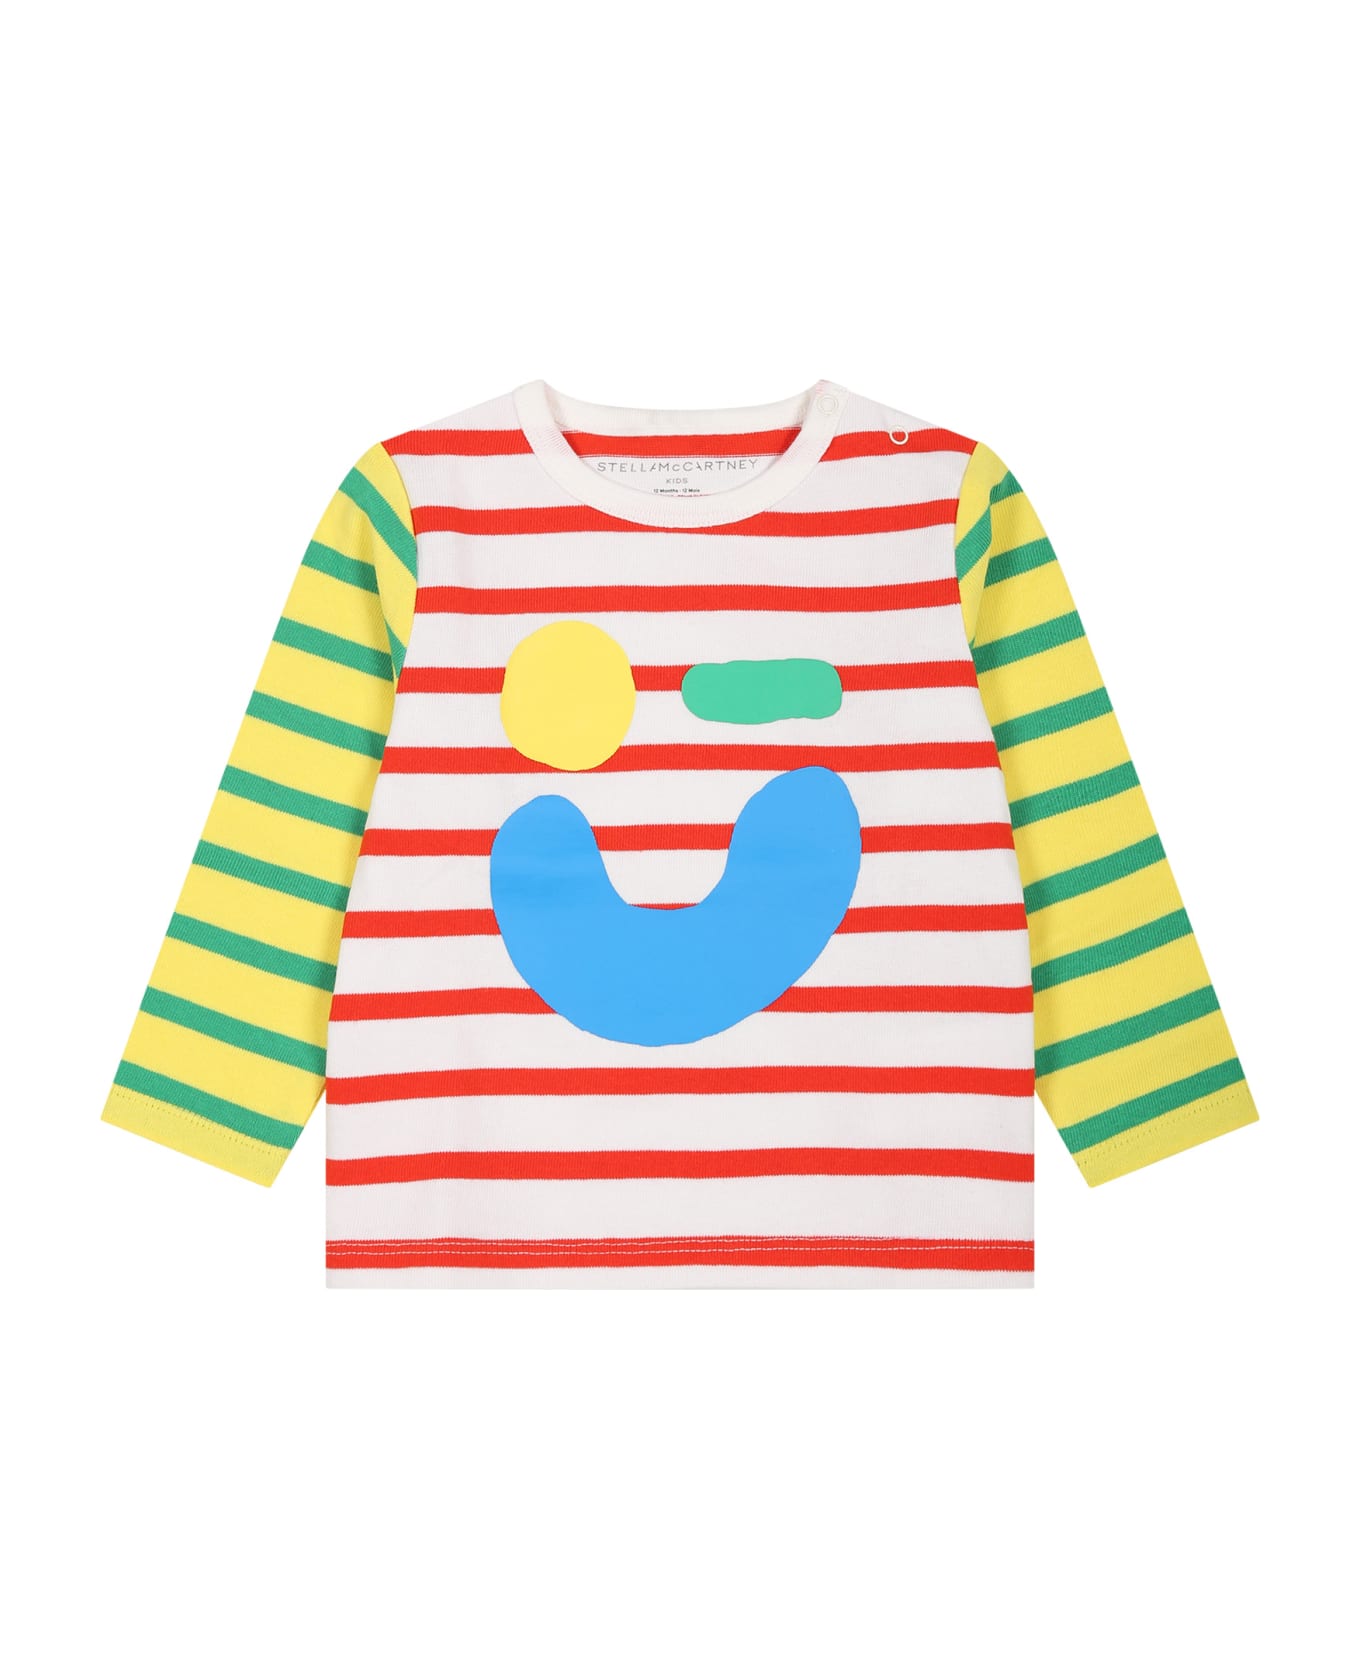 Stella McCartney Kids White T-shirt For Baby Boy With Multicolor Prints - Multicolor